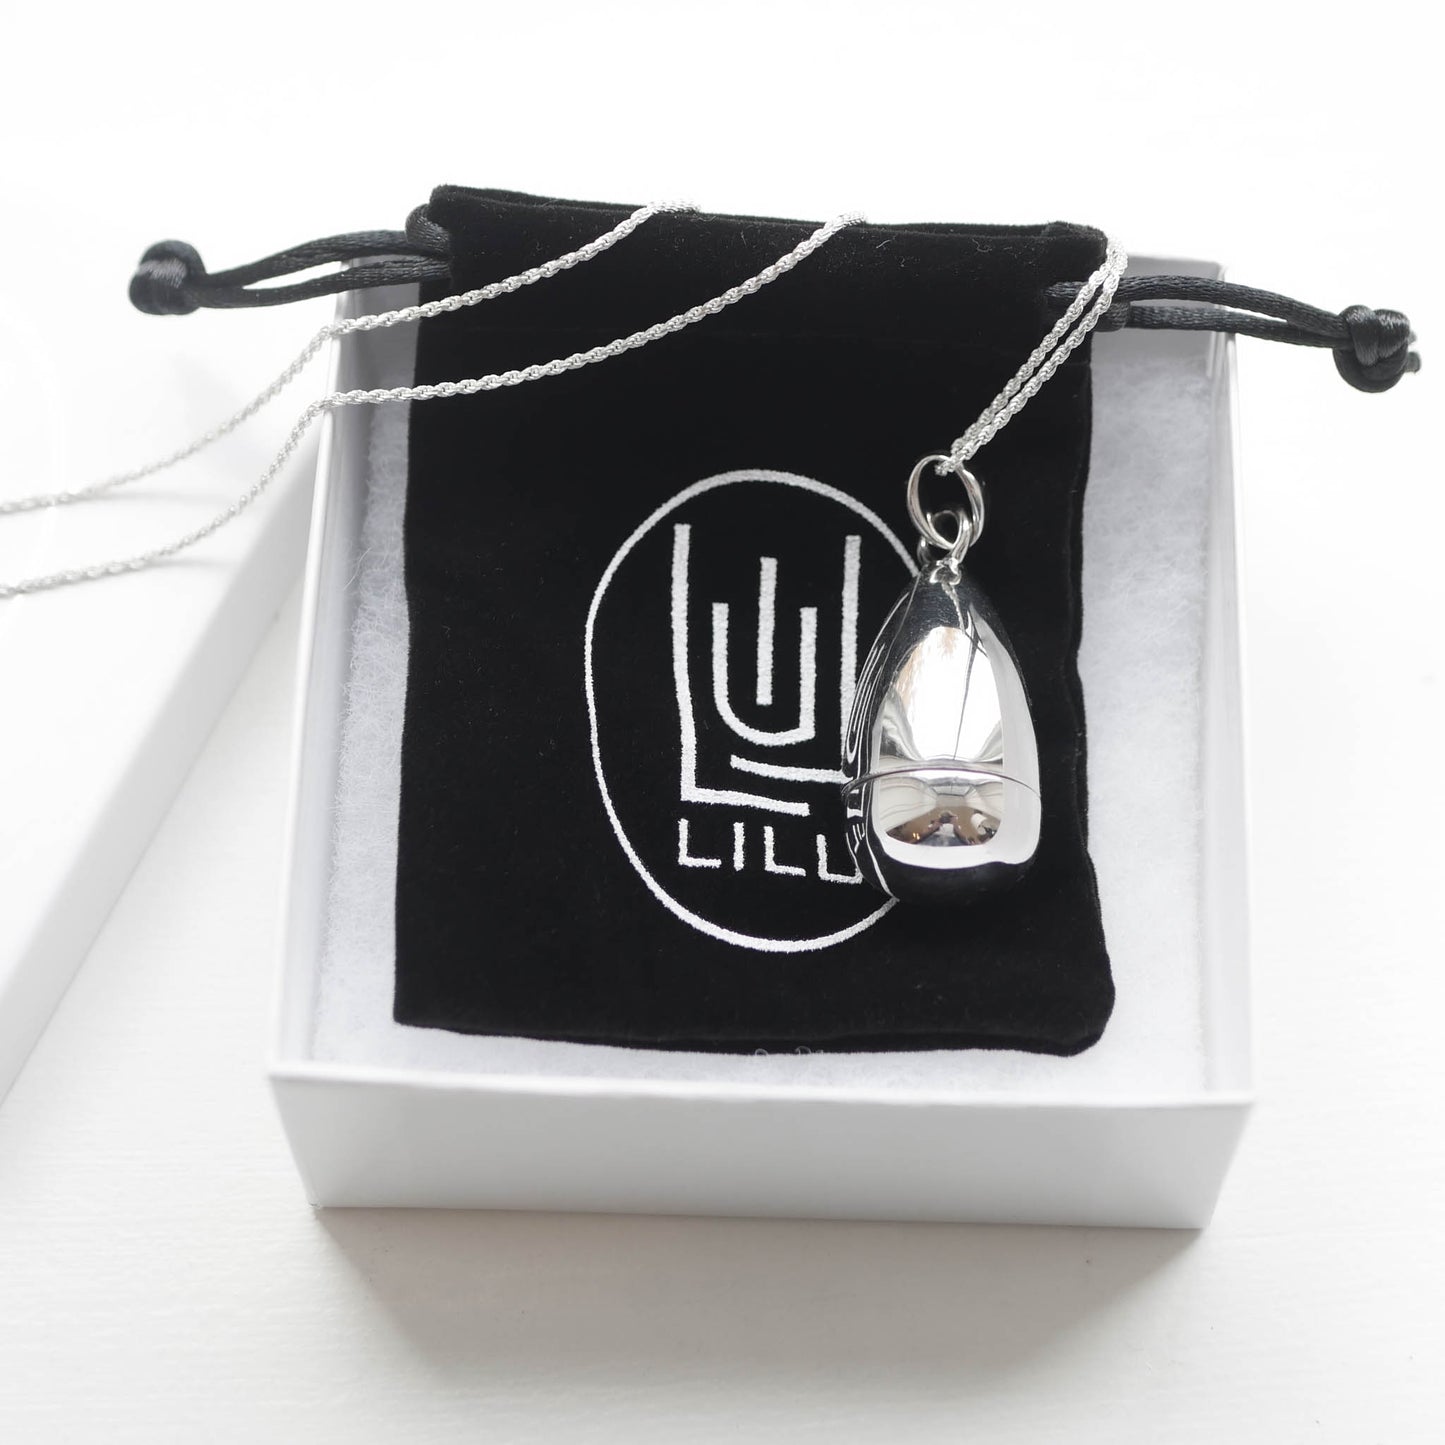 LiLu Lip Balm Necklace Camille Sterling Silver with 8 Lip Balm Refills or DIY Refills - Use Your Balm